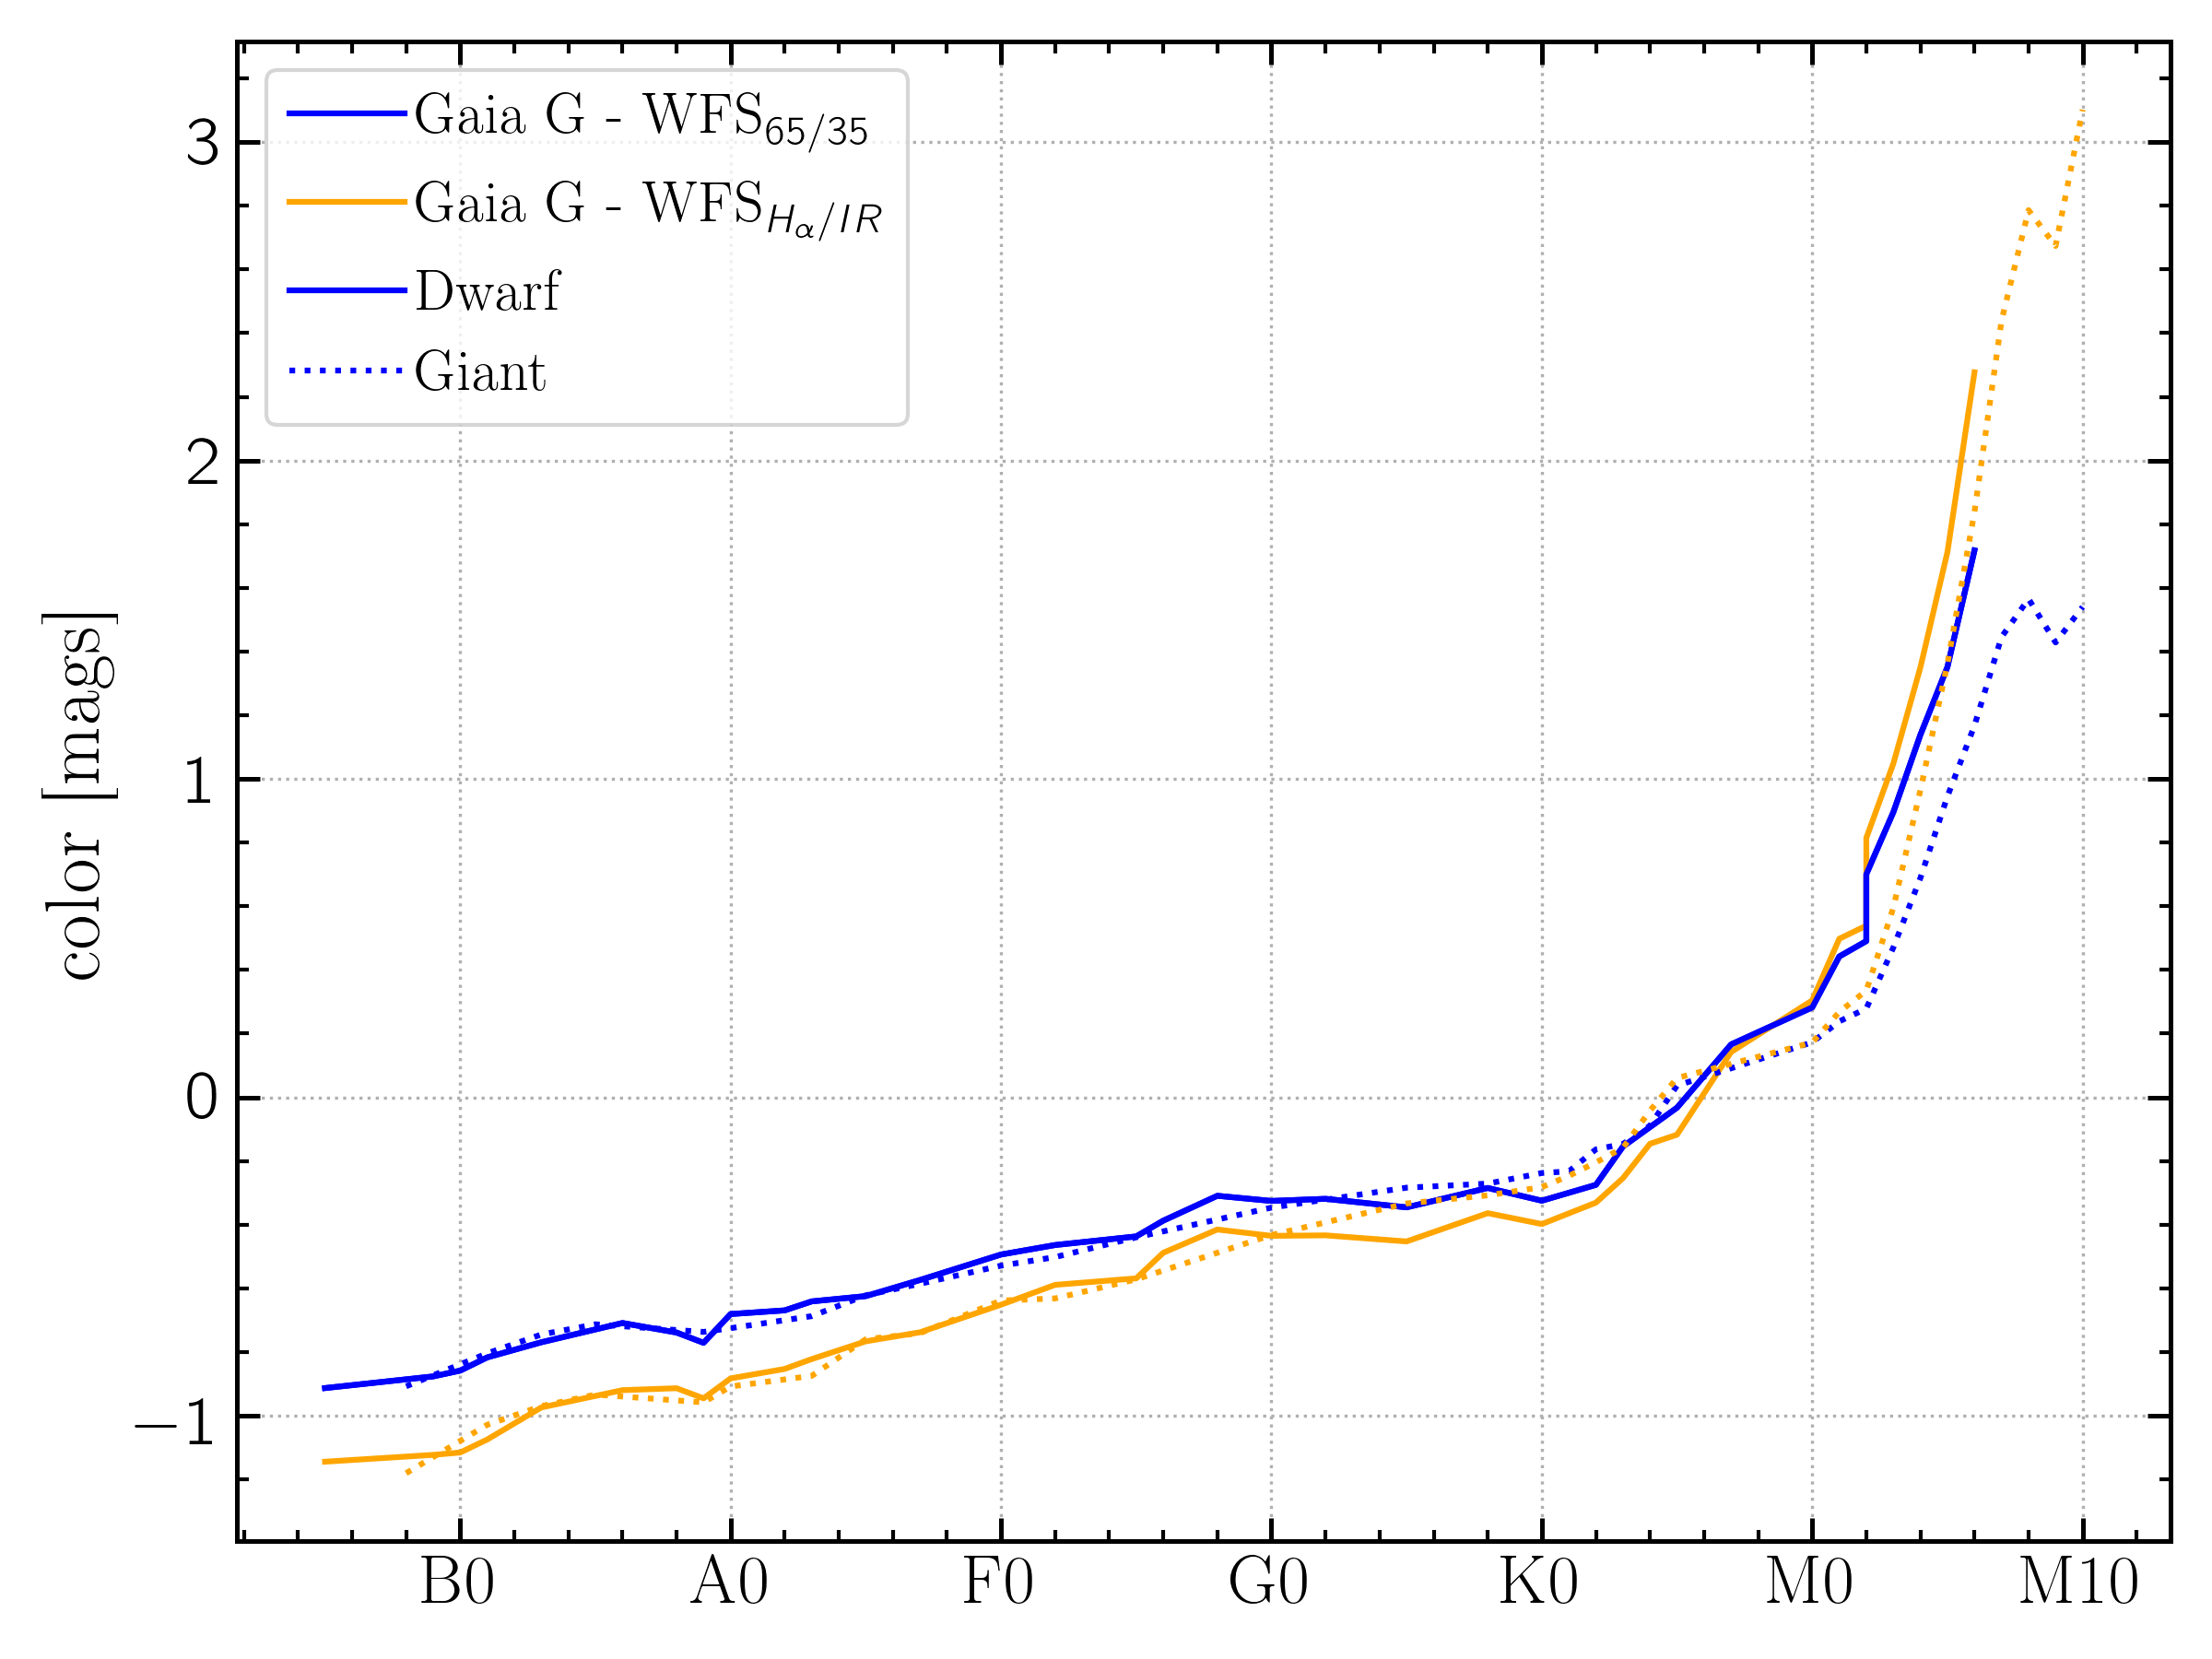 Gaia to WFS curves by spectral type